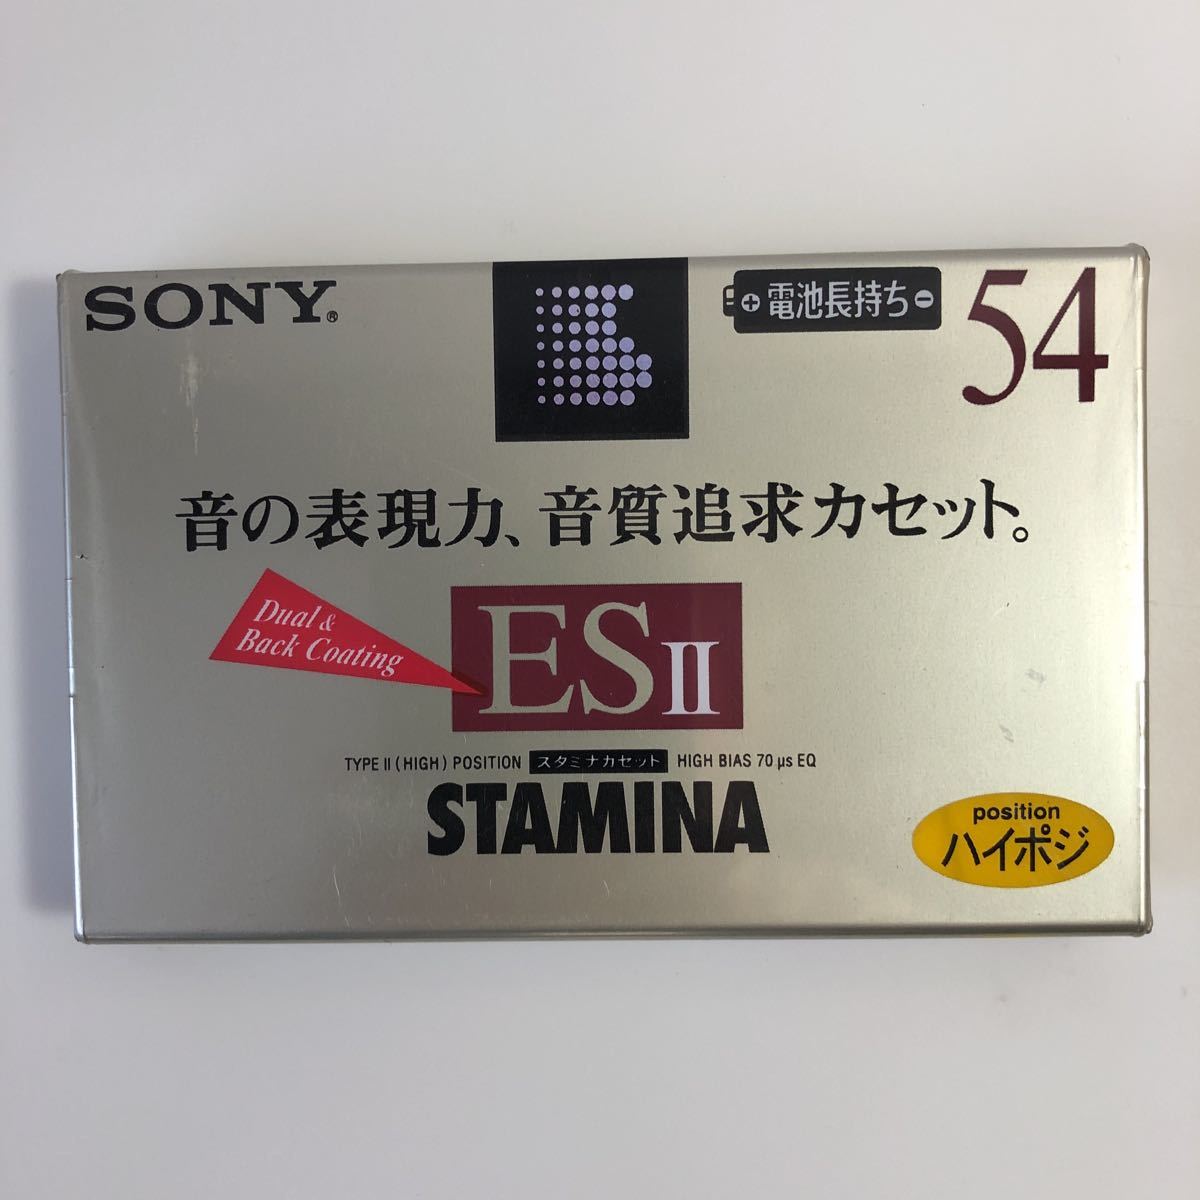  cassette tape high position SONY ESⅡ 54 minute 2 ps 